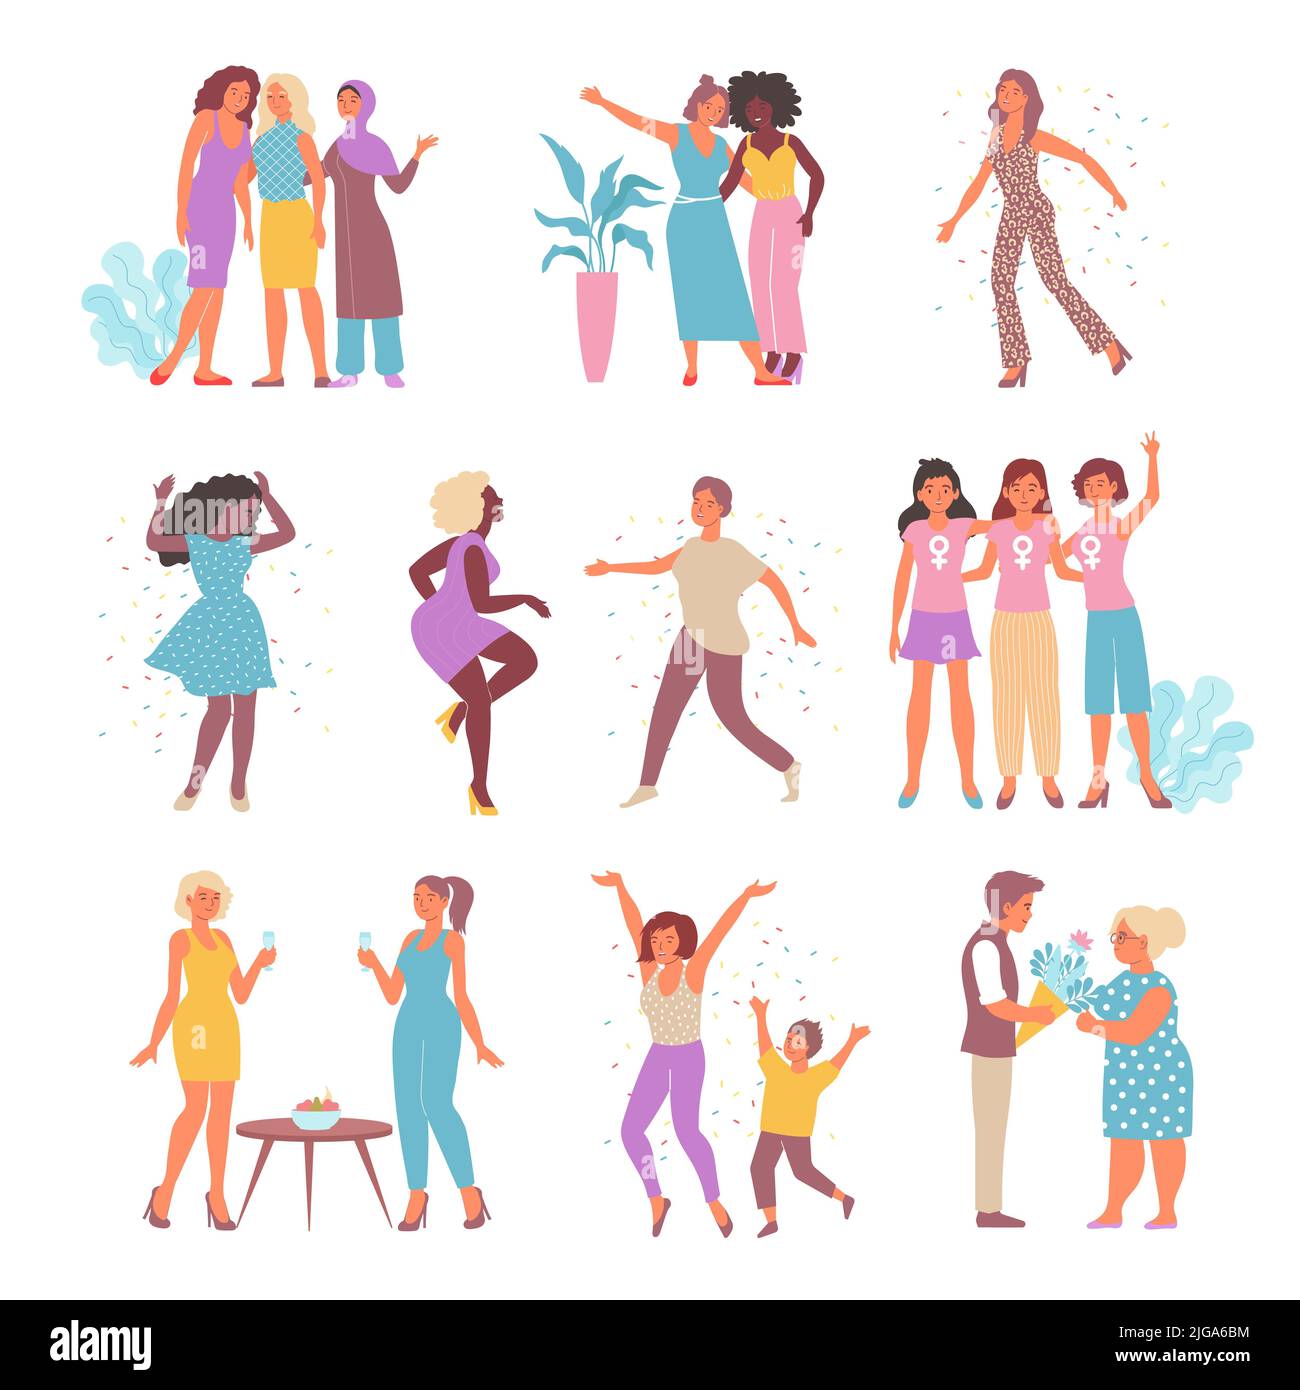 International womens day icon set with female characters in different ...